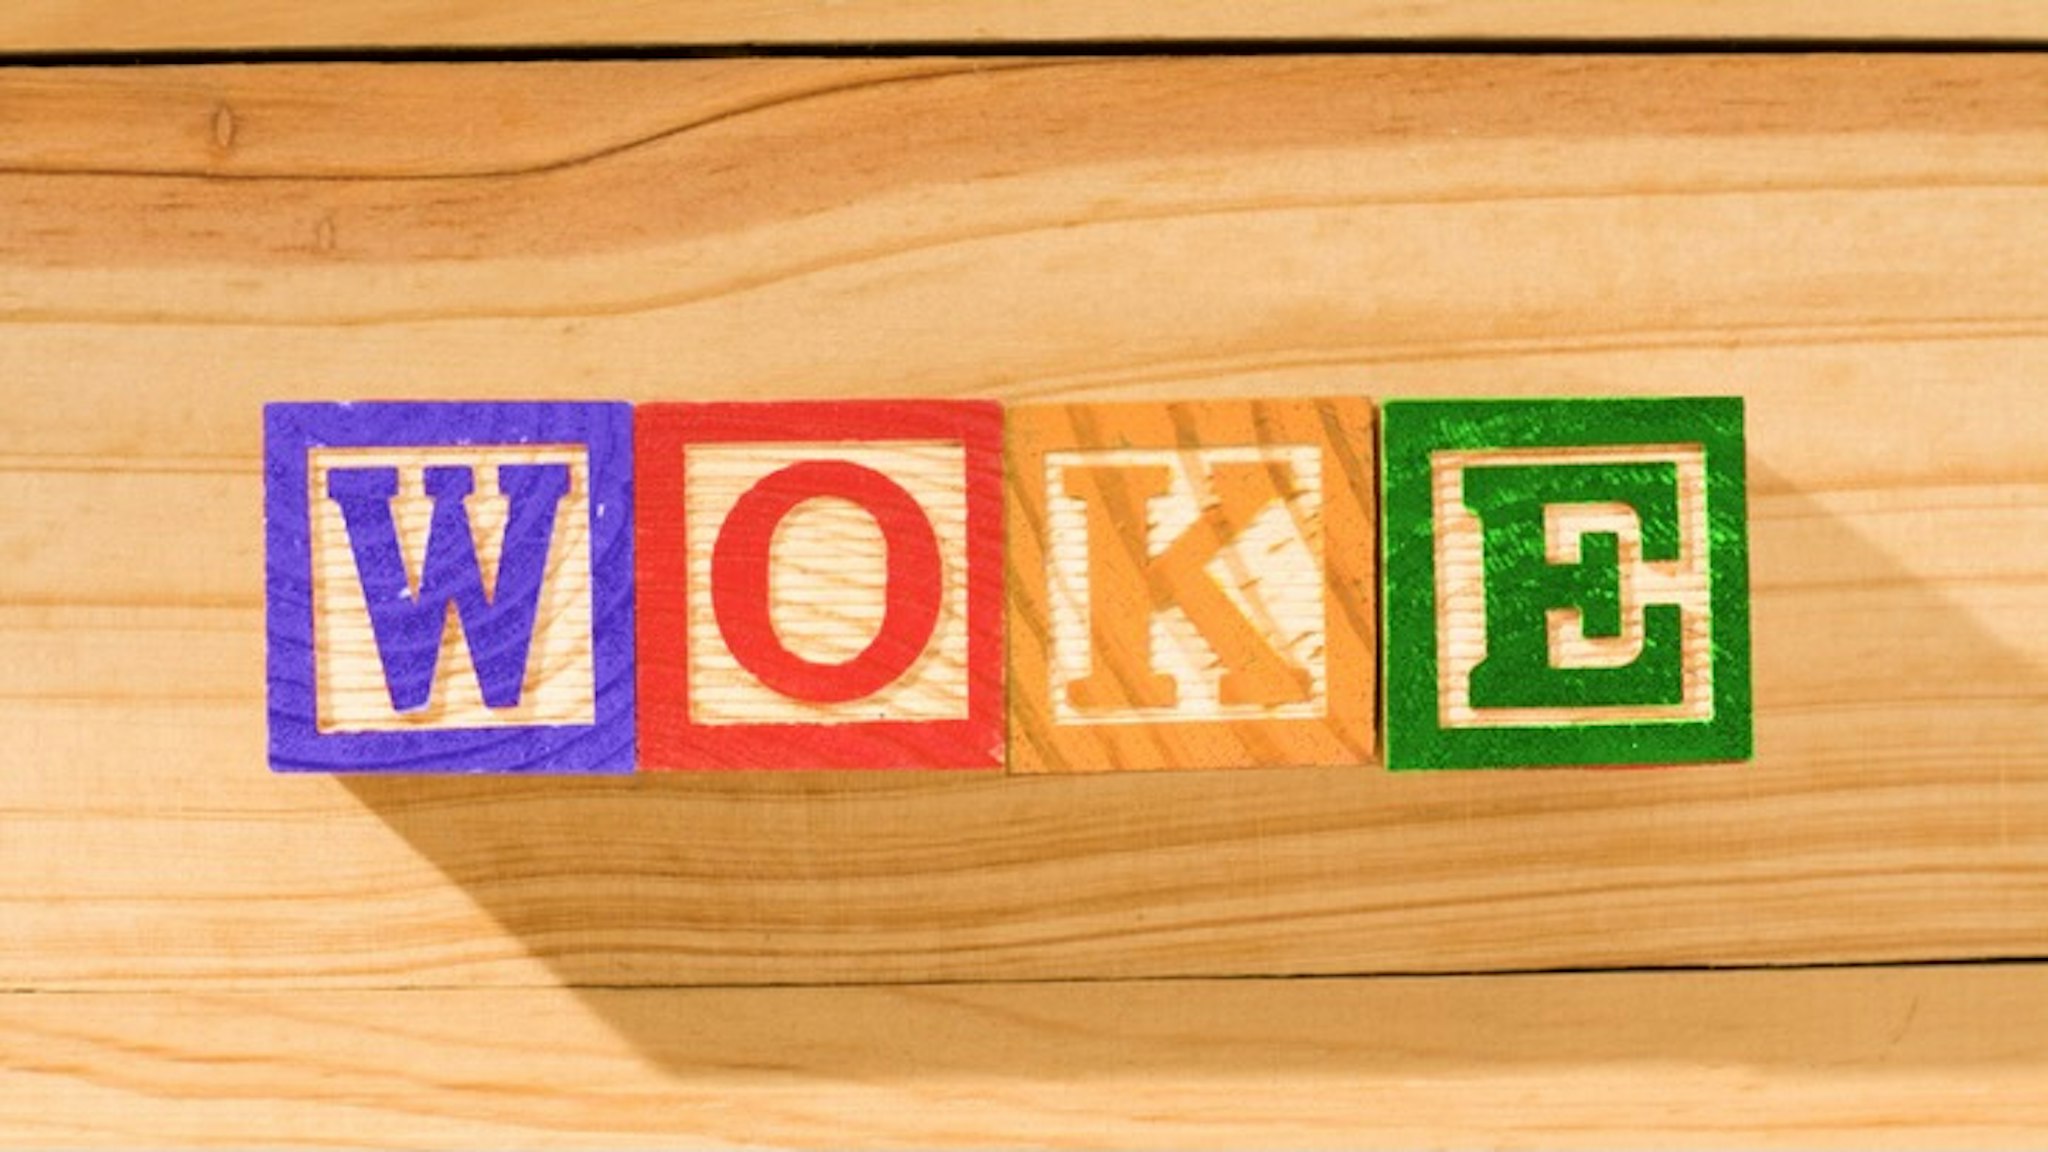 Spectacular wooden cubes with the word WOKE on a wooden surface. - stock photo Spectacular wooden cubes with the word WOKE on a wooden surface. Alexander Sanchez via Getty Images